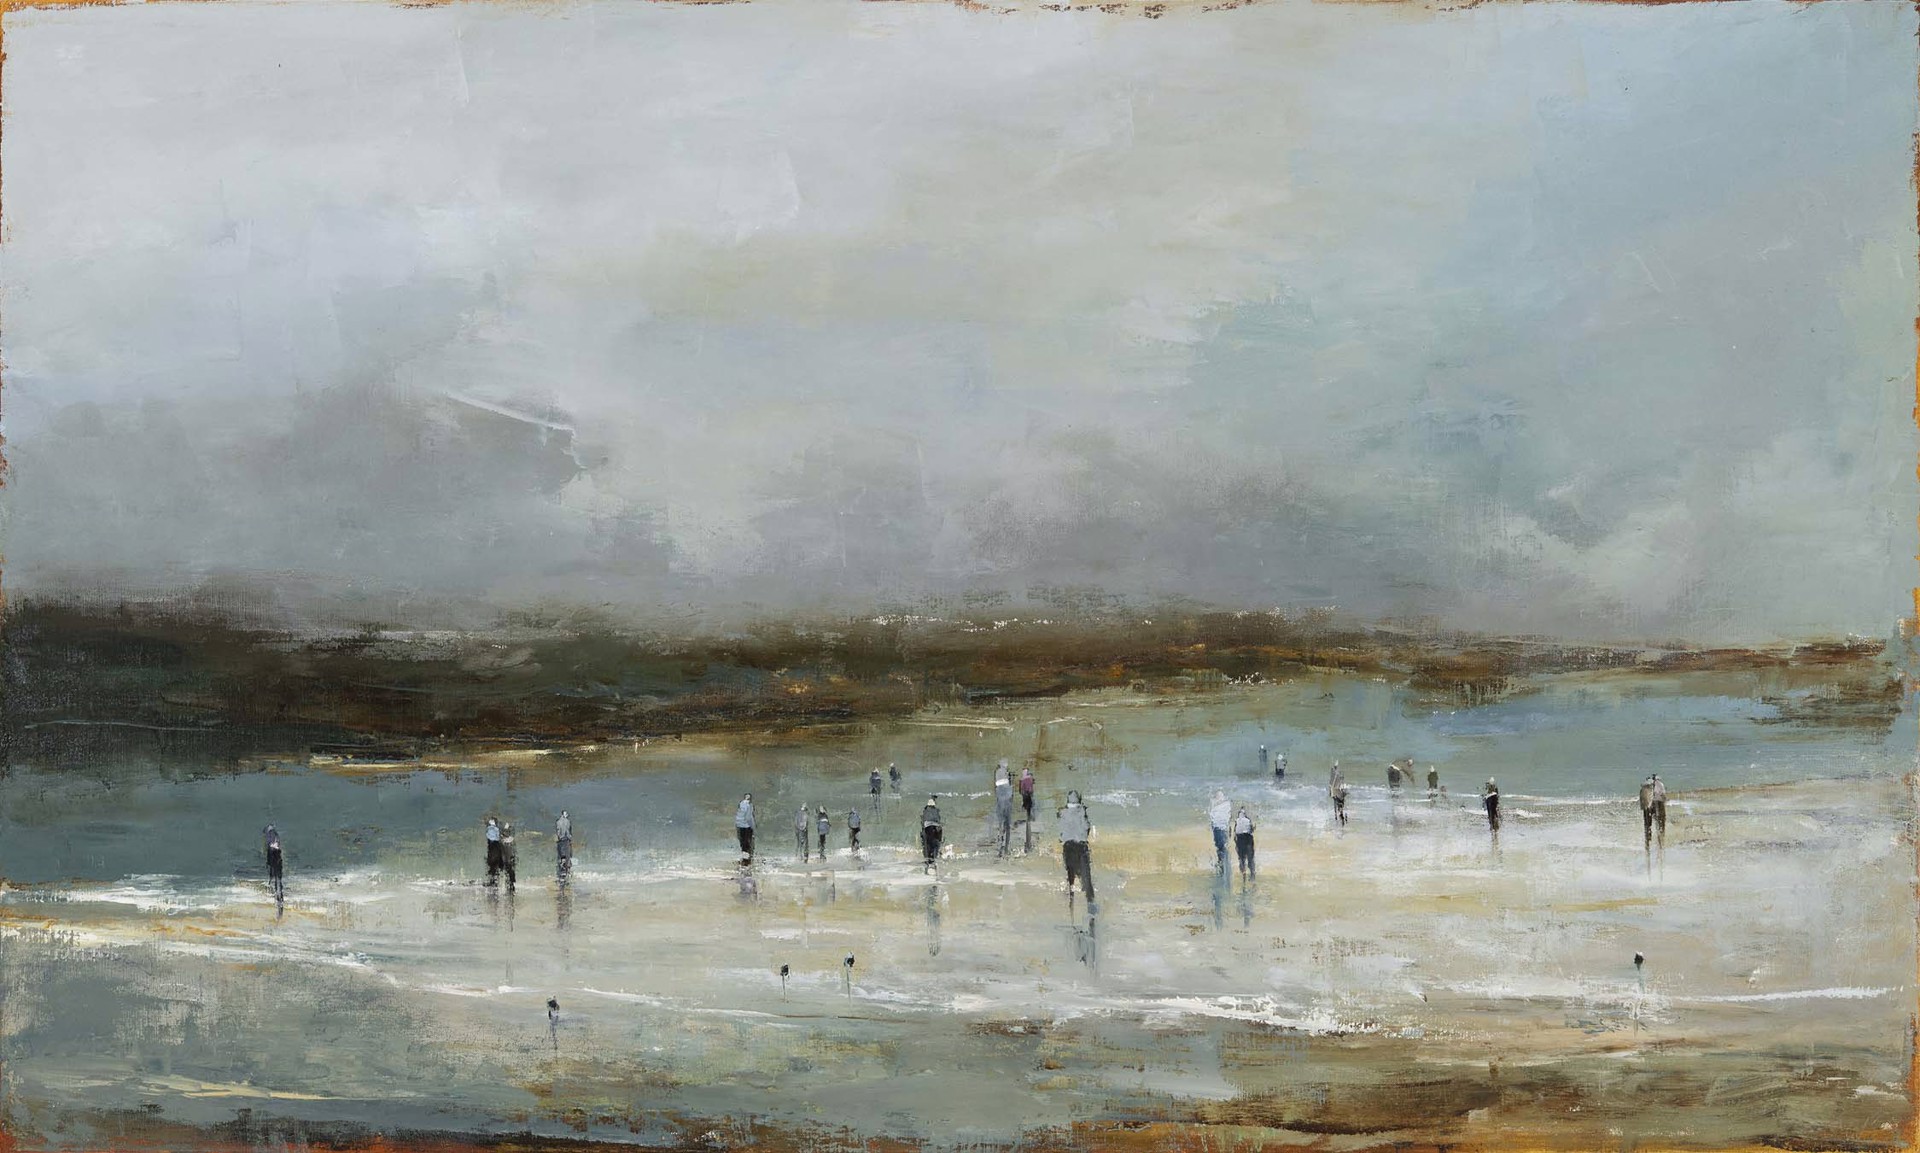 Rivers Flow and Seasons Turn by France Jodoin